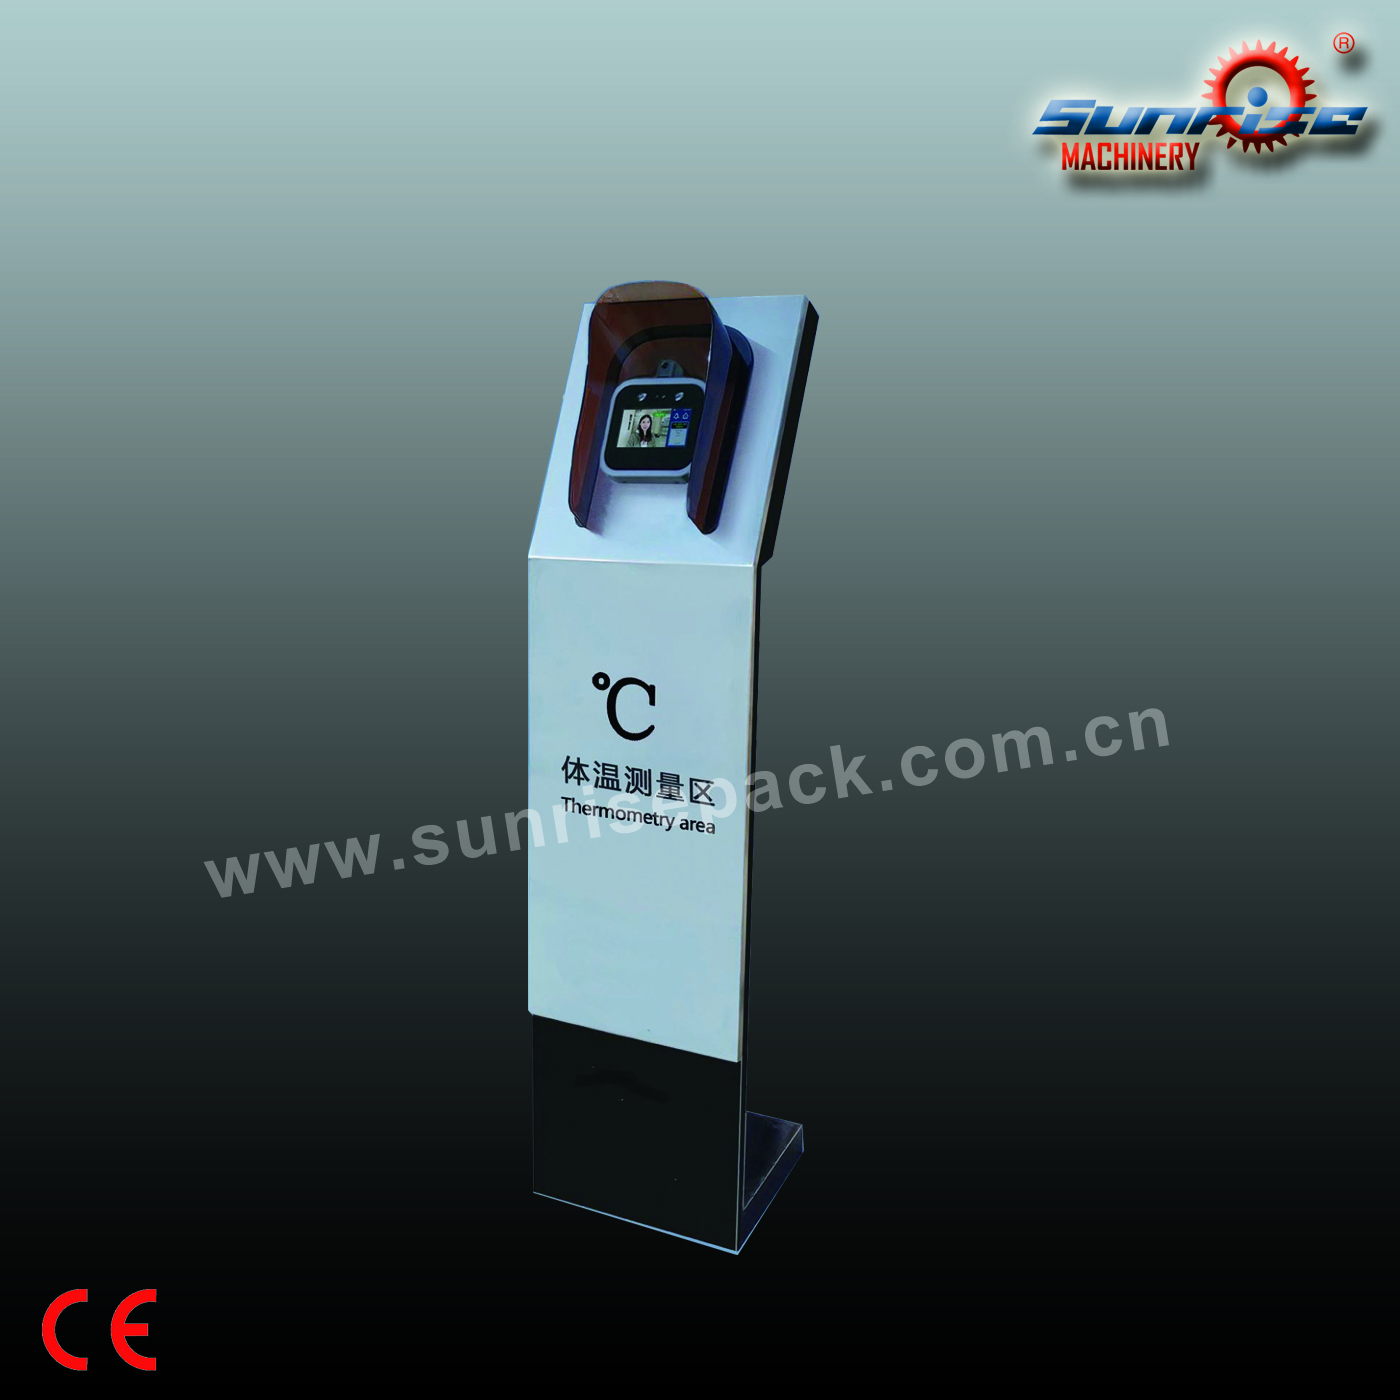 GTSV-CW1 Face Recognition Thermometry.jpg